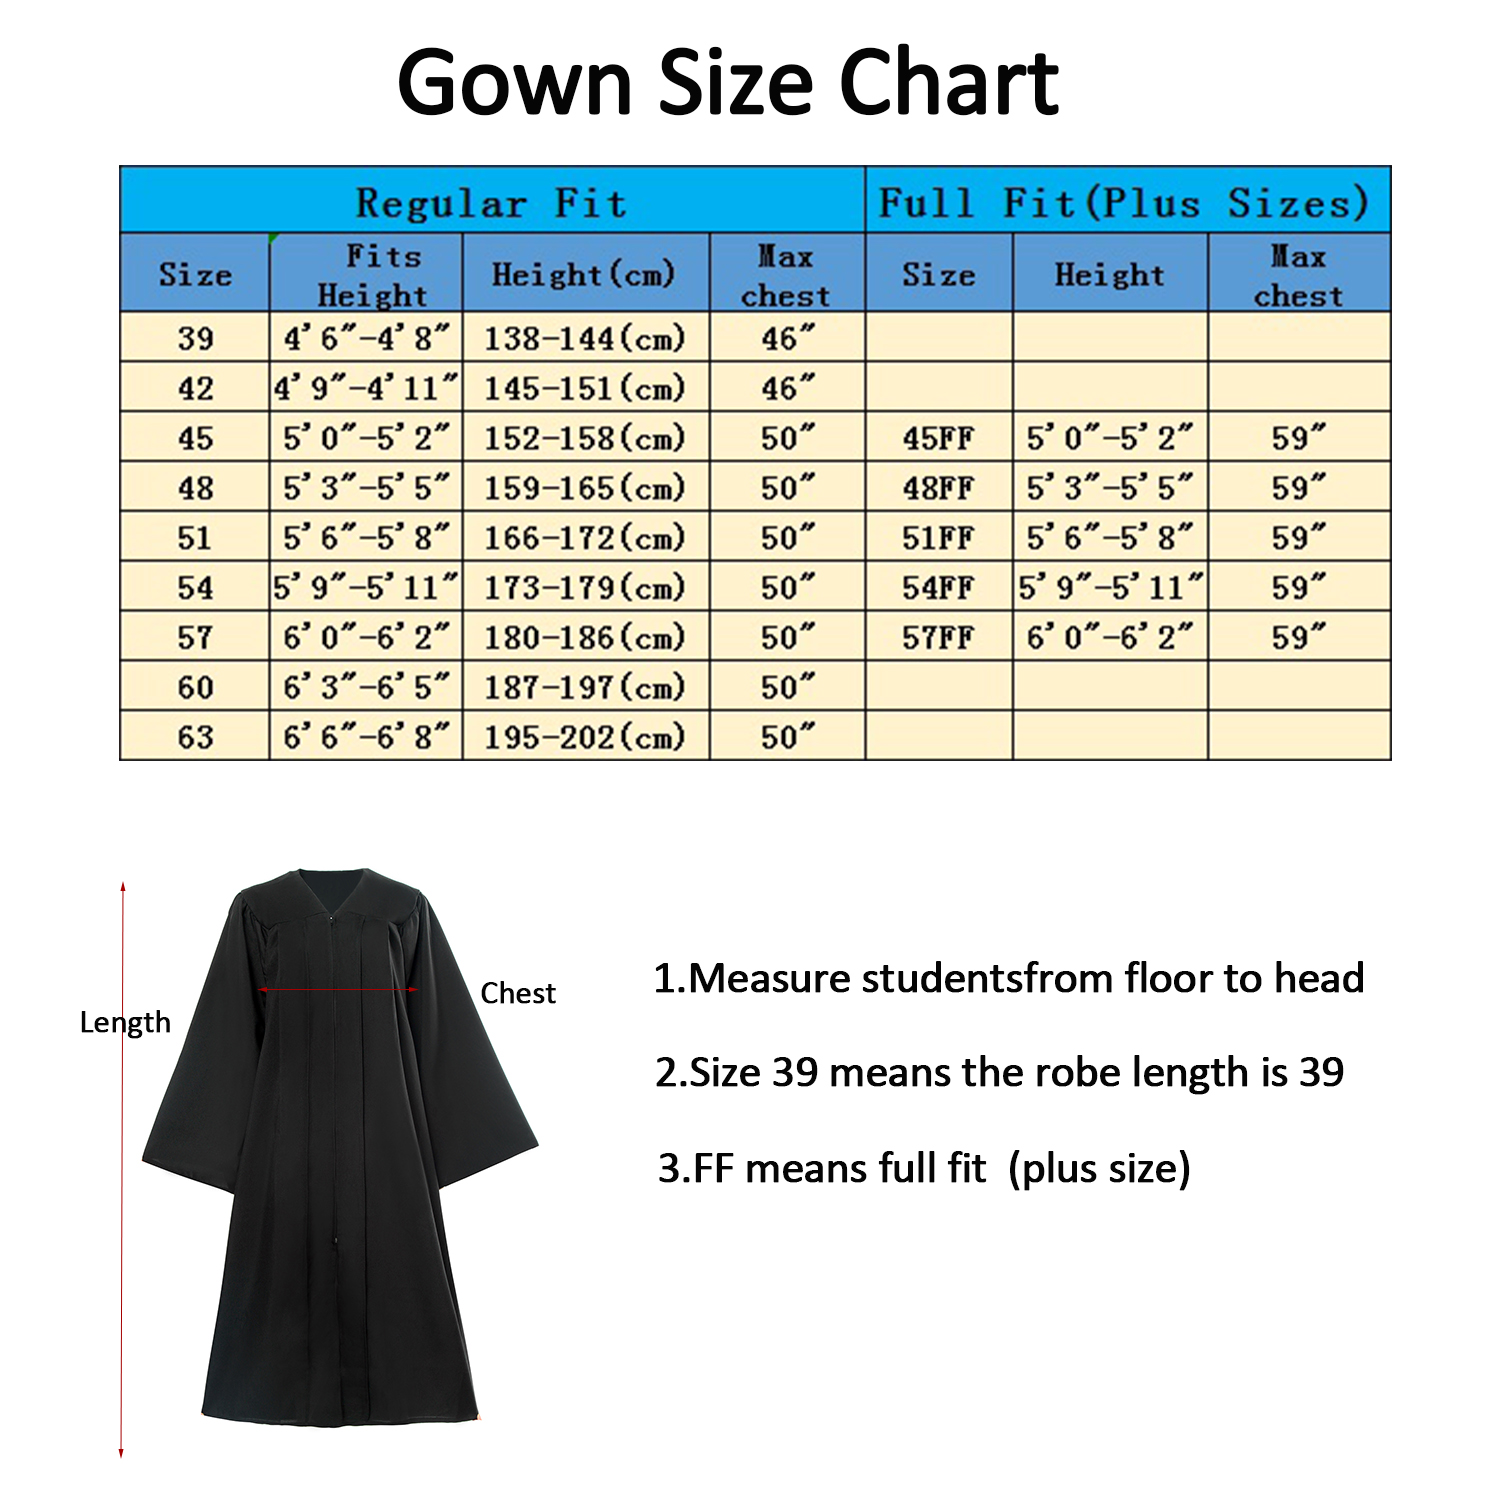 Top more than 141 graduation gown size chart latest - camera.edu.vn